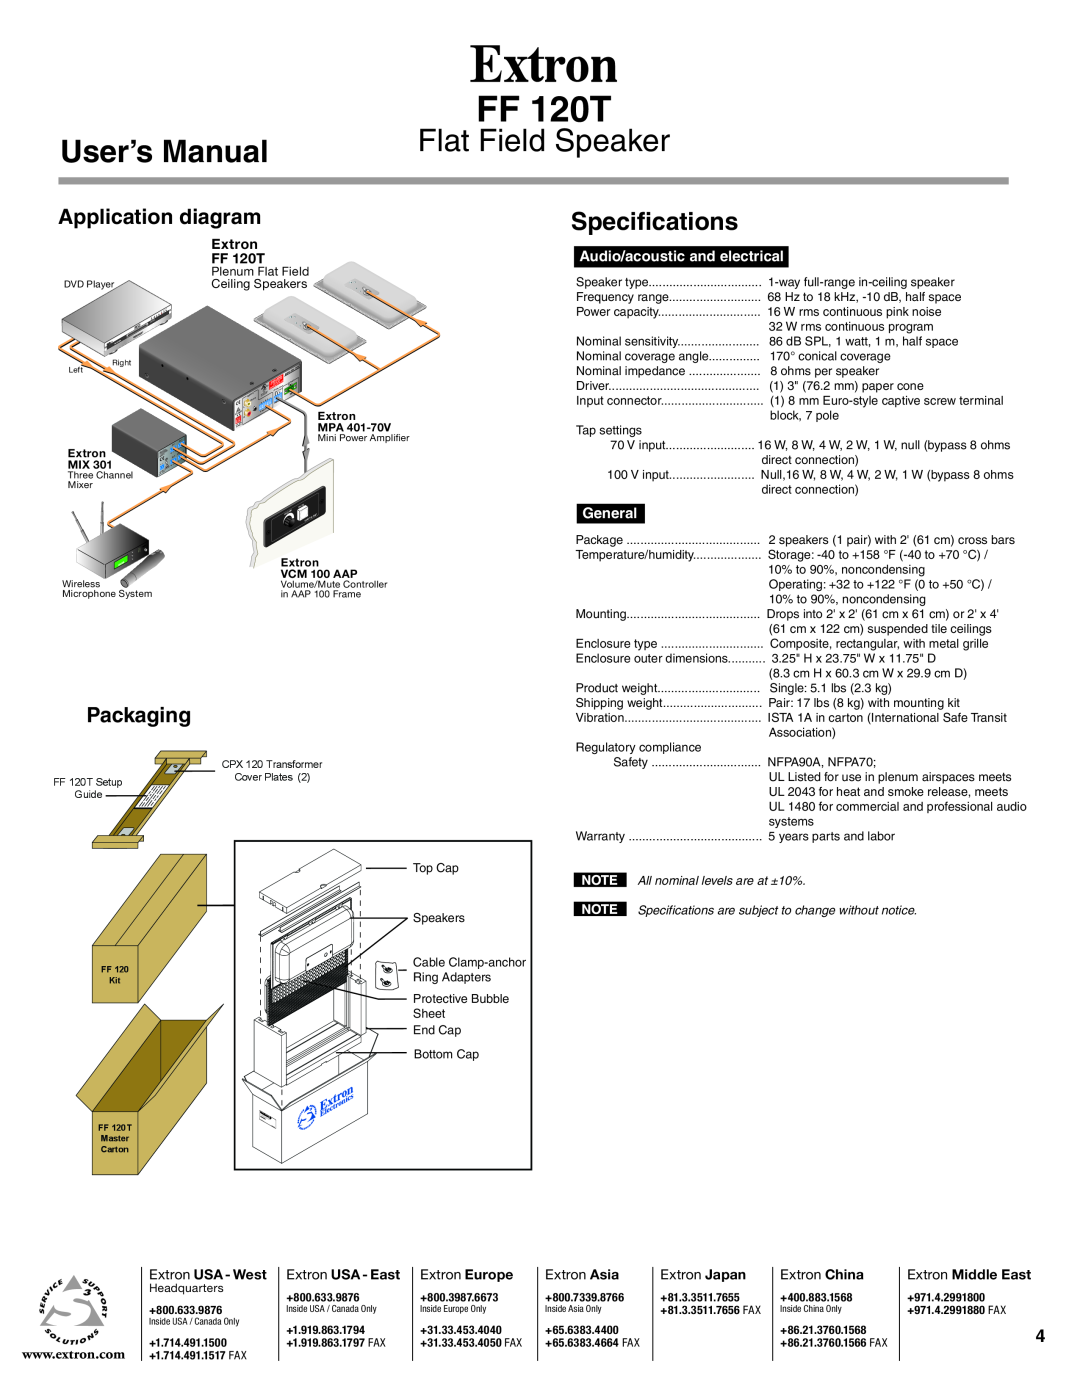 Extron electronic FF 120T Flat Field Speaker, Specifications, Application diagram, Packaging, Extron FF120T, General 